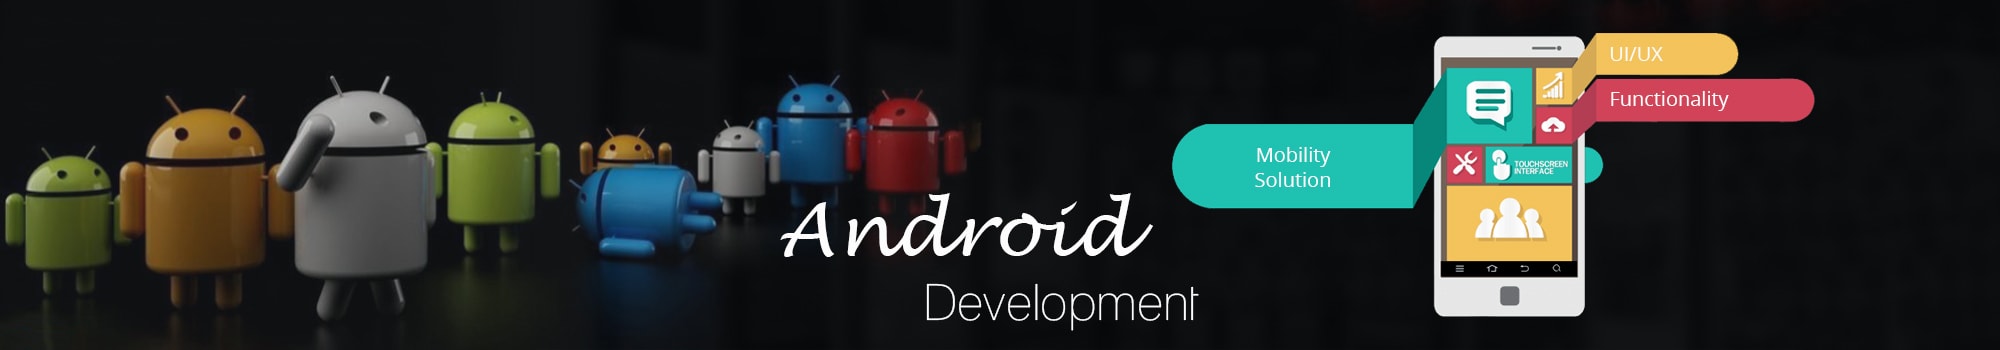 Android App Development Services in New York